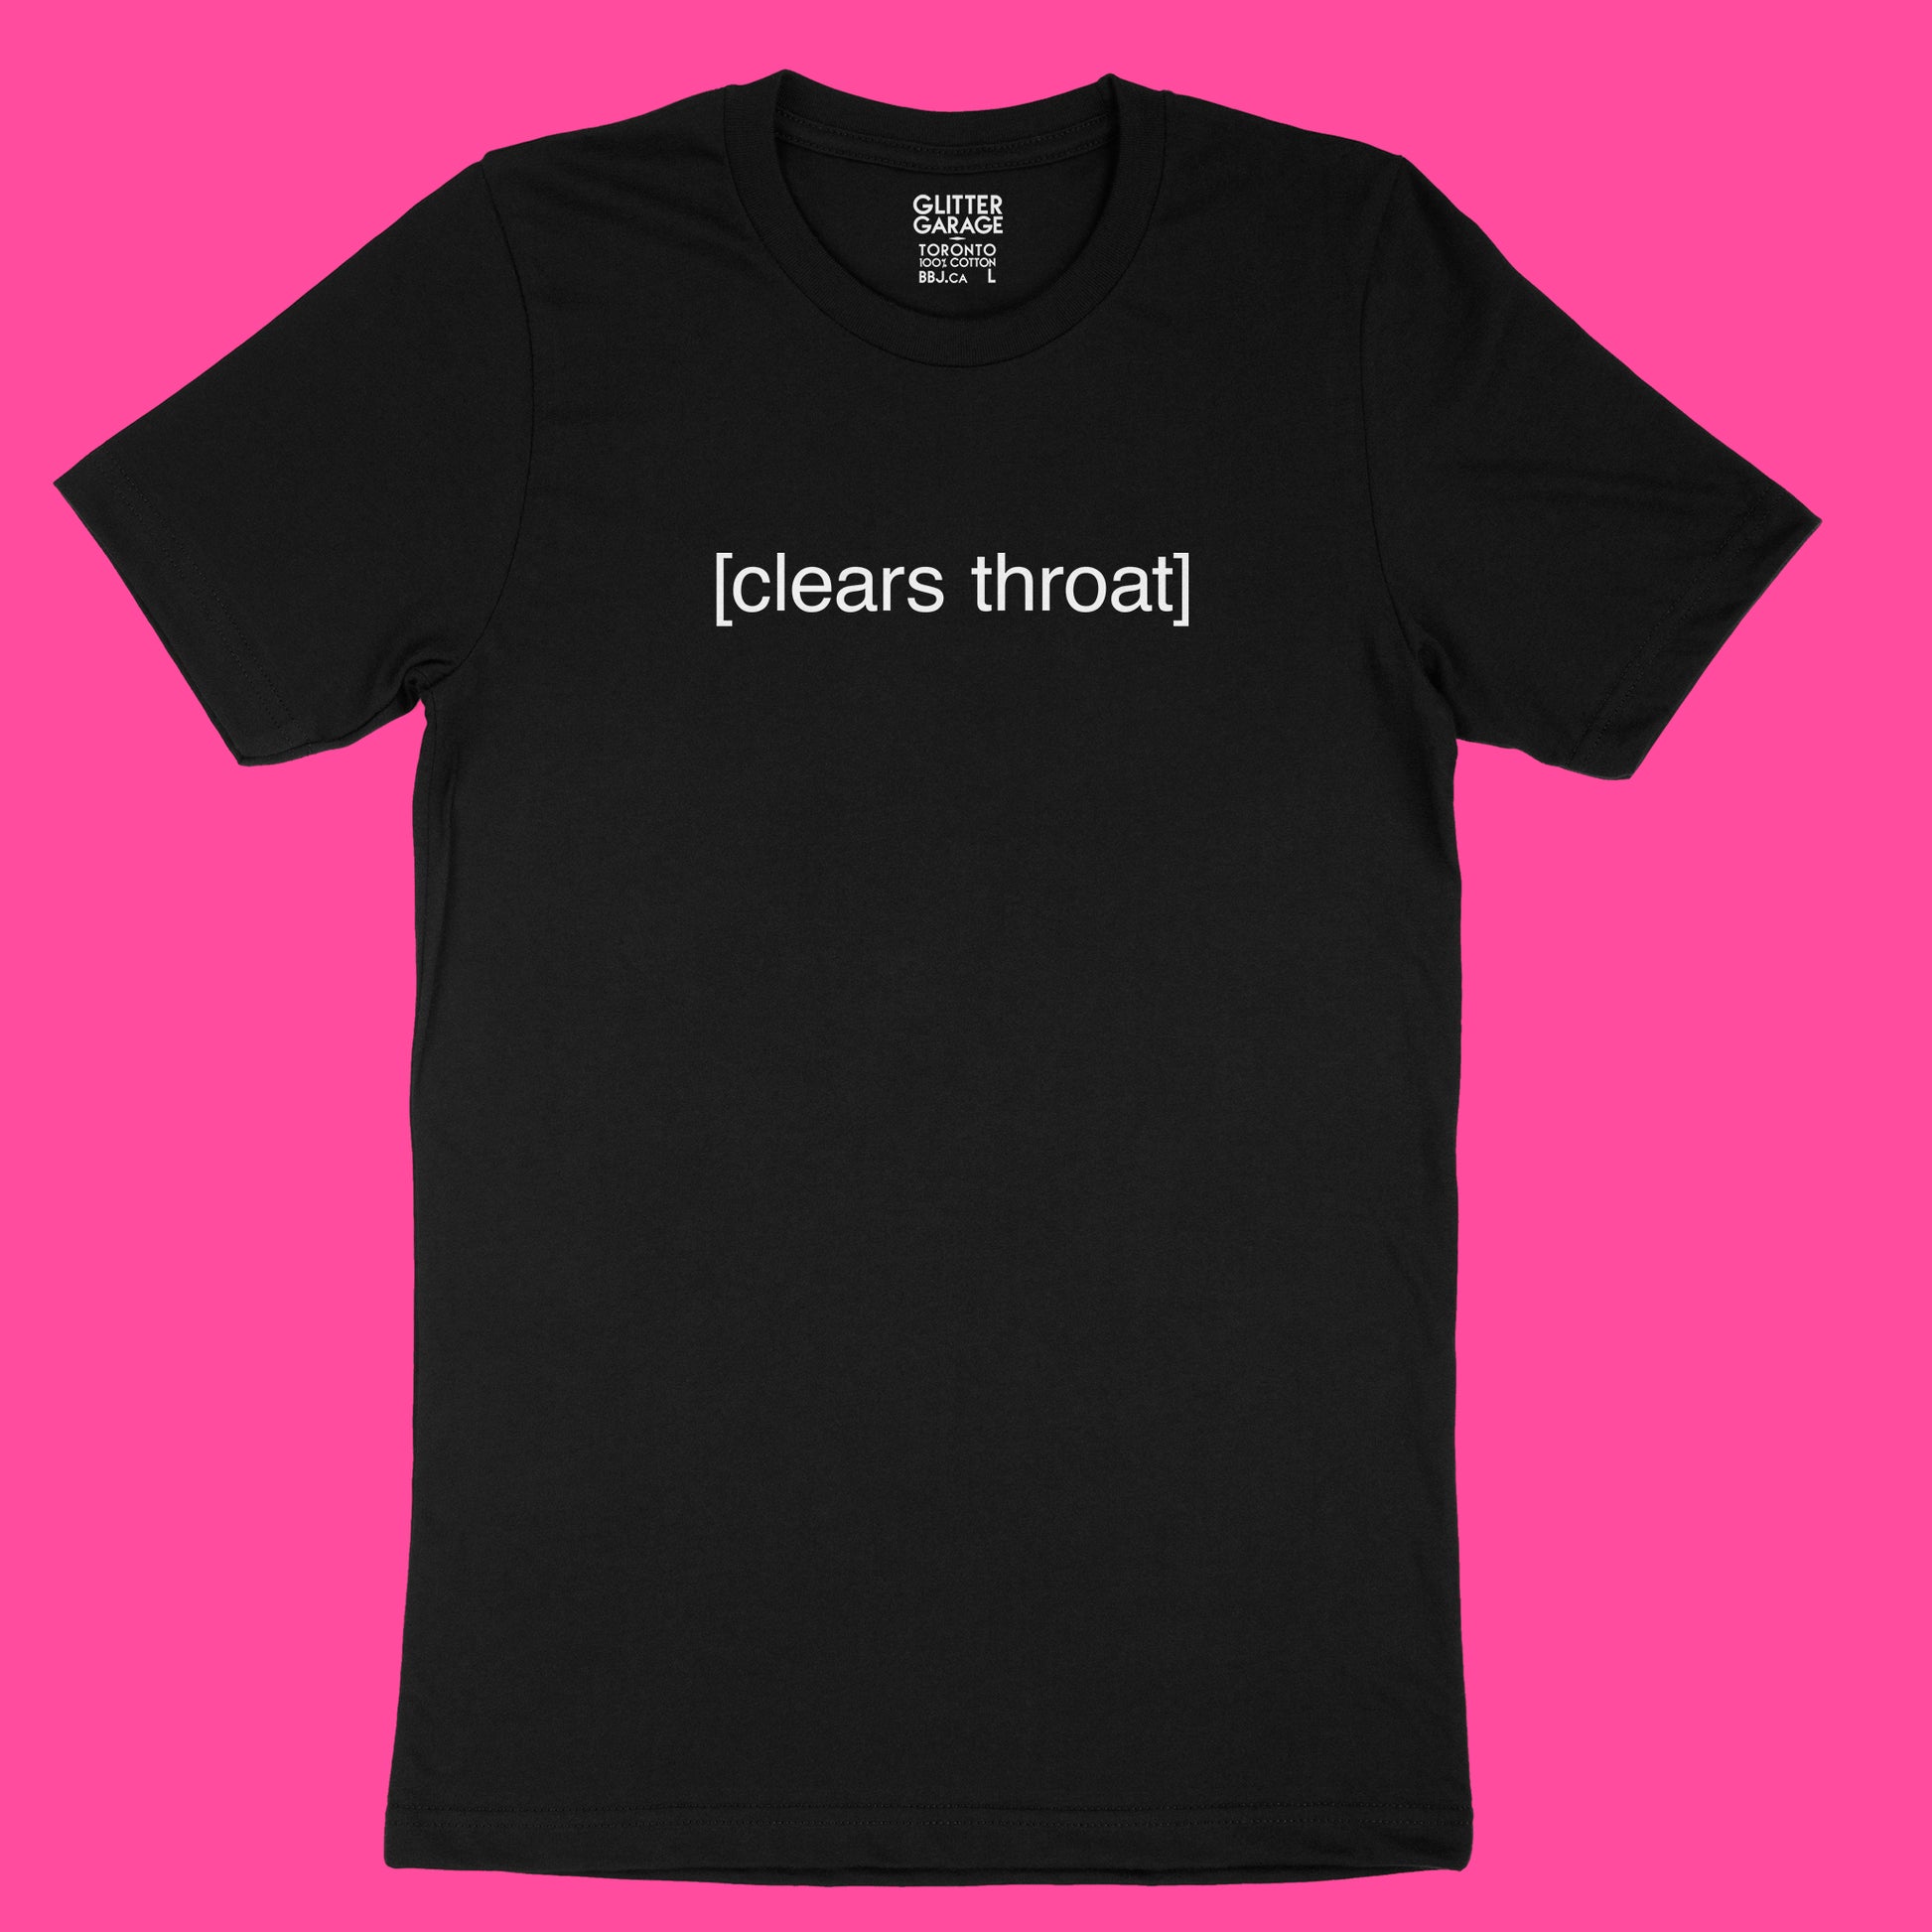 Black unisex cotton t-shirt with [clears throat] in white text by BBJ / Glitter Garage